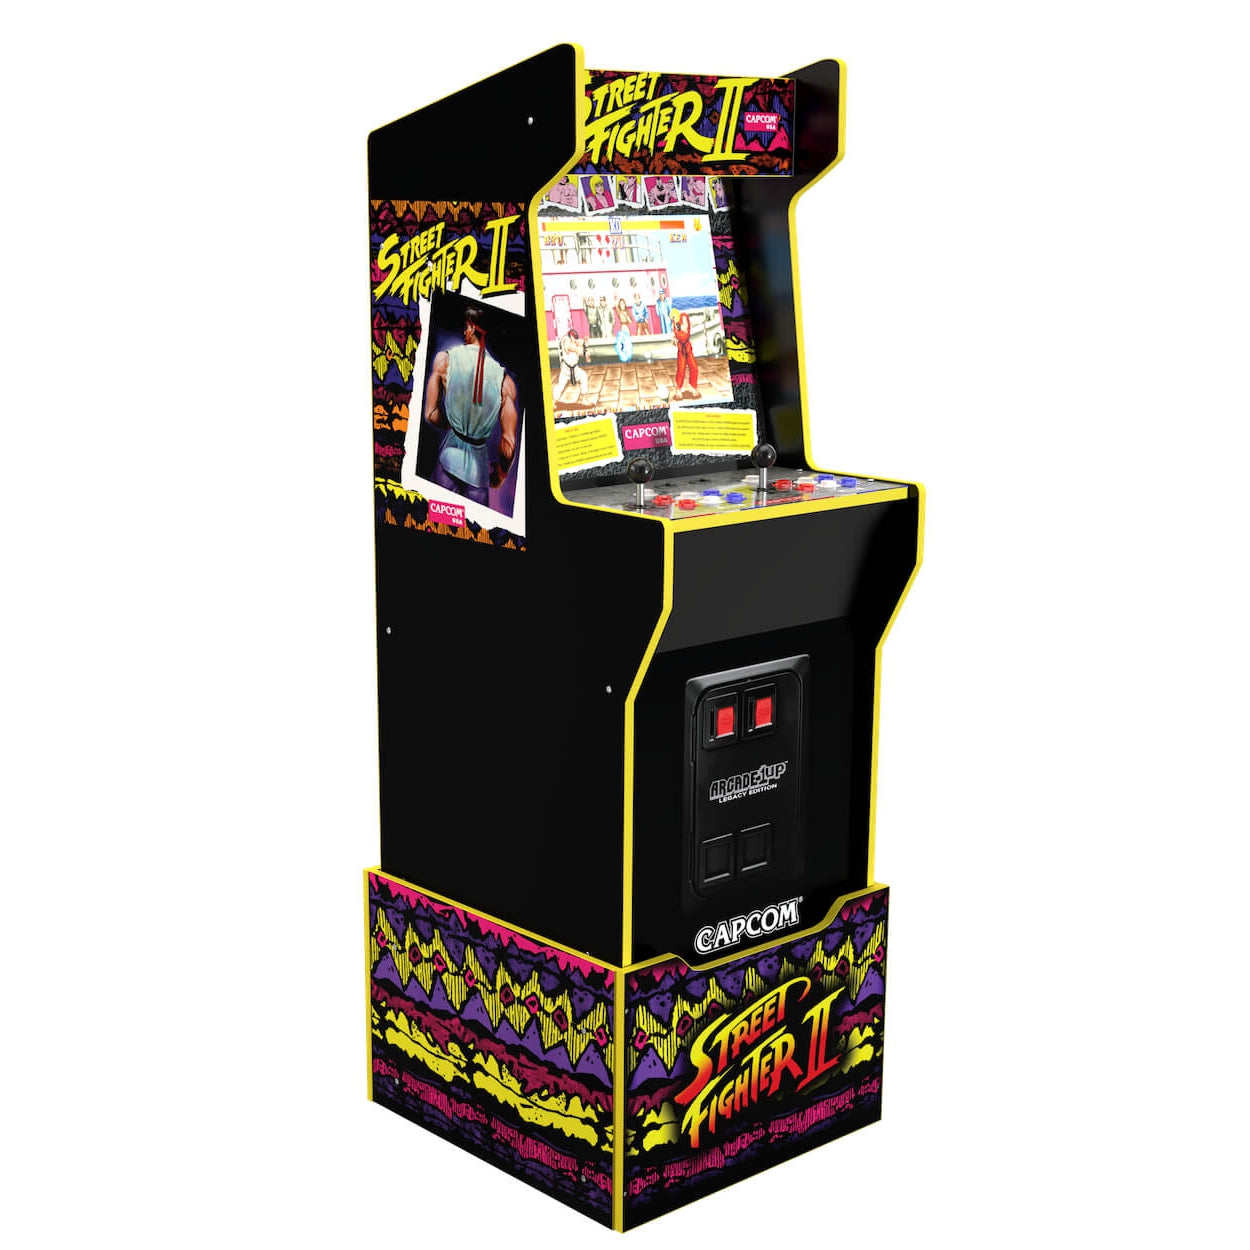 Arcade1Up Street Fighter II Capcom Legacy Edition Cabinet